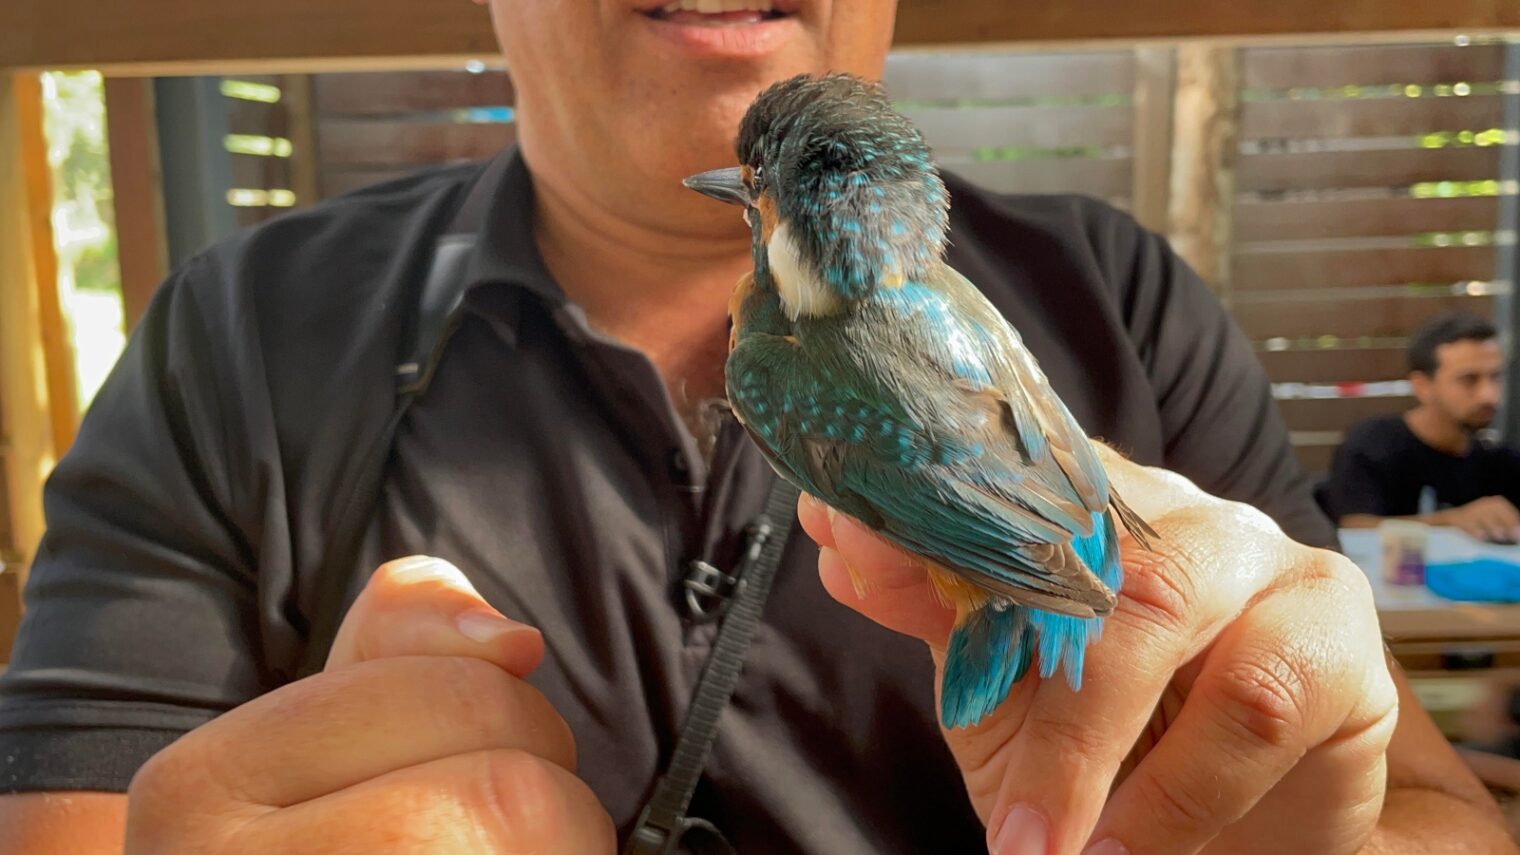 Ornithologist Yaron Charka holding a kingfisher (shaldag, in Hebrew) at Rosh Tzipor Birdwatching Center in Tel Aviv. Photo by Natalie Selvin